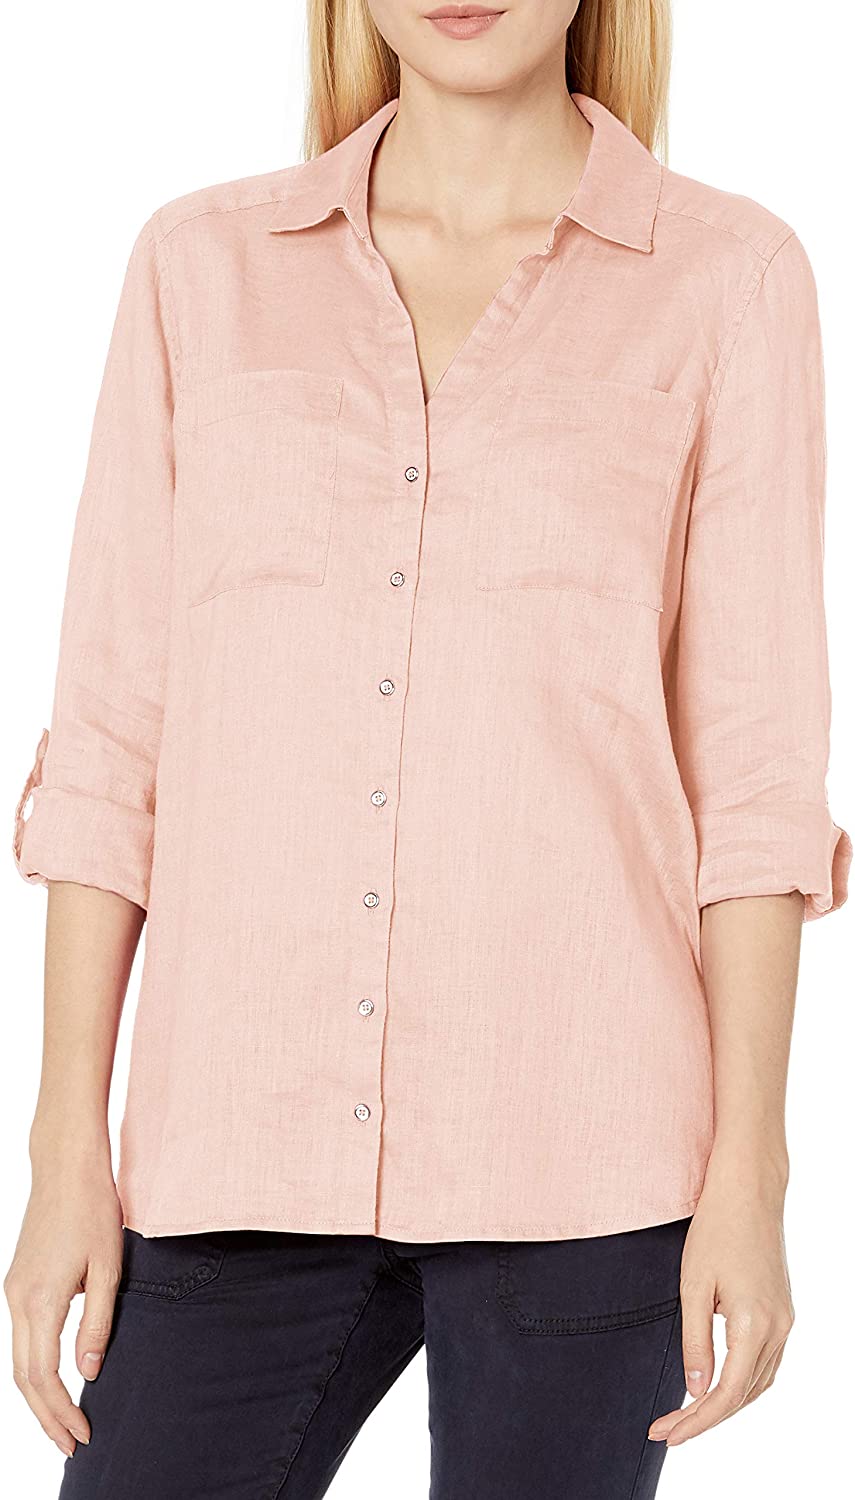 Price:$29.70 Vince Camuto Women's Long Sleeve Two Pocket Pinstripe Refresh Button Down Blouse at Amazon Women’s Clothing store